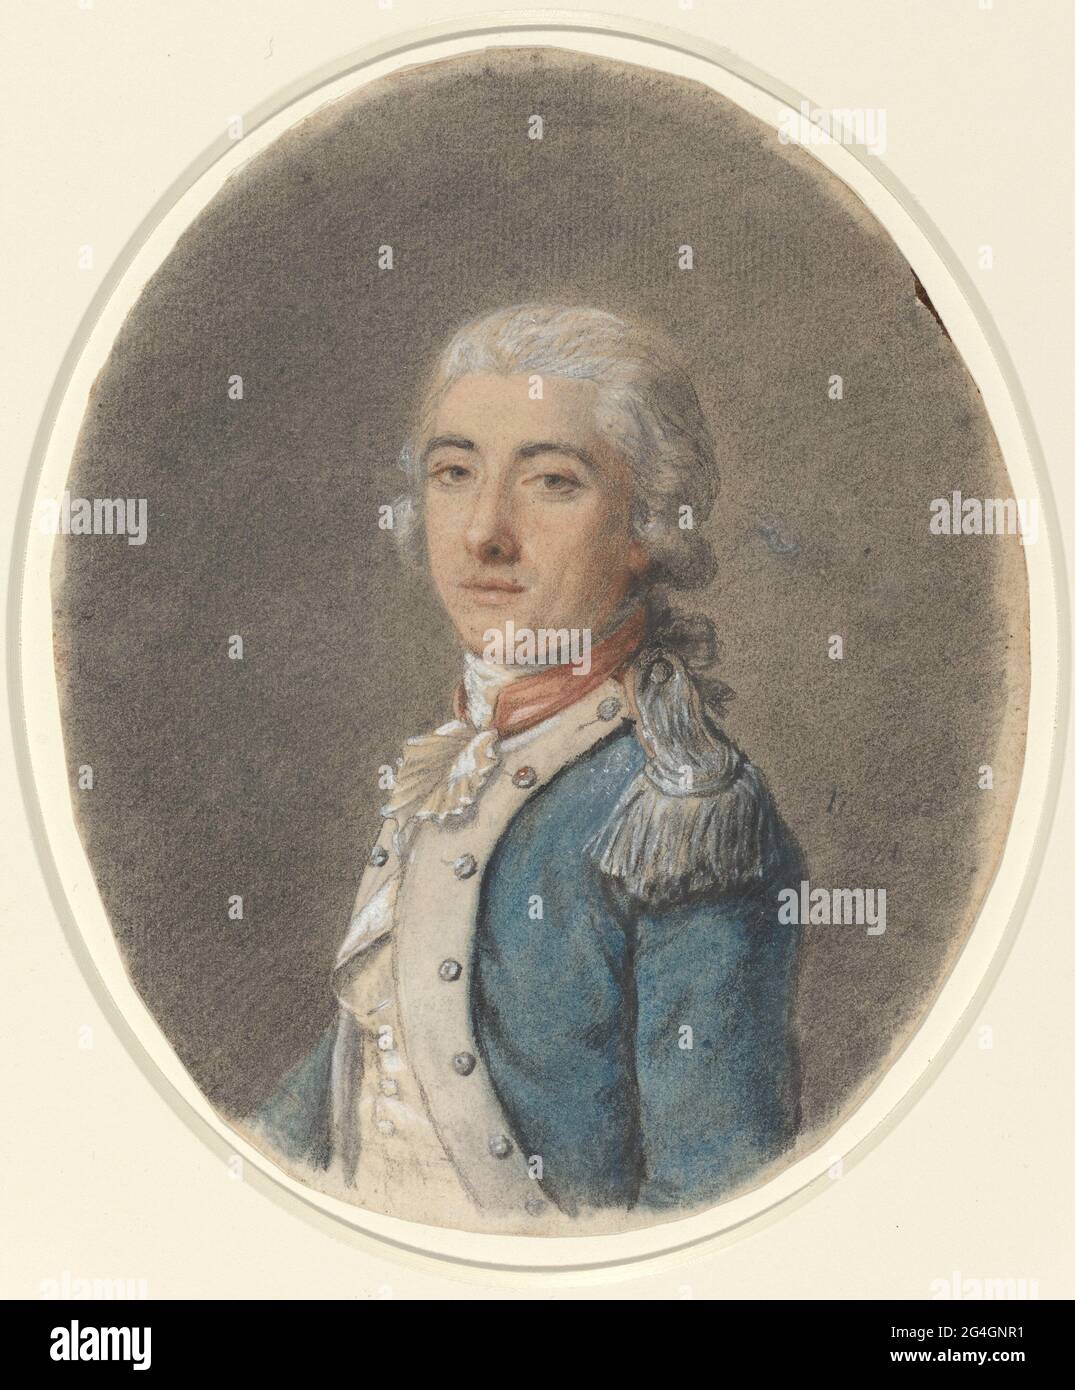 Portrait of a Man in a Military Uniform, 18th century. Stock Photo